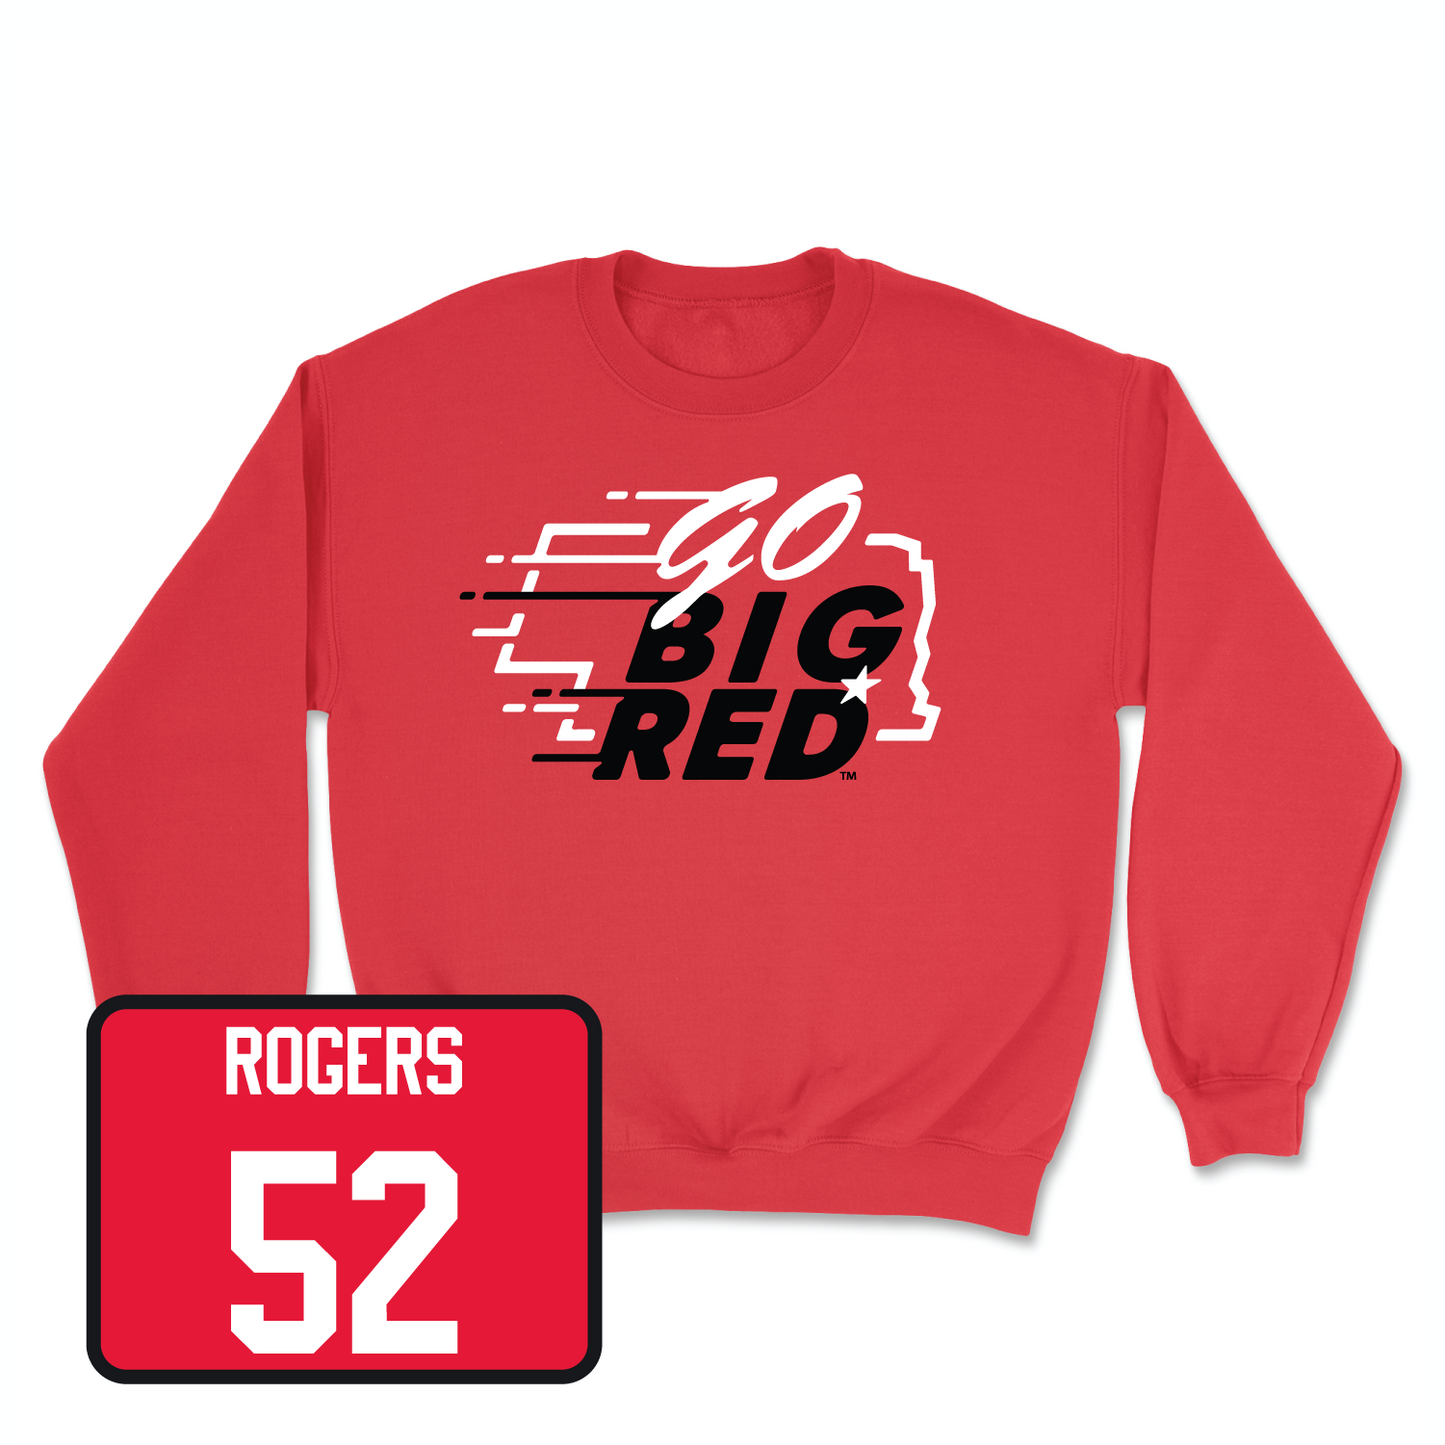 Red Football GBR Crew Youth Small / Dylan Rogers | #52